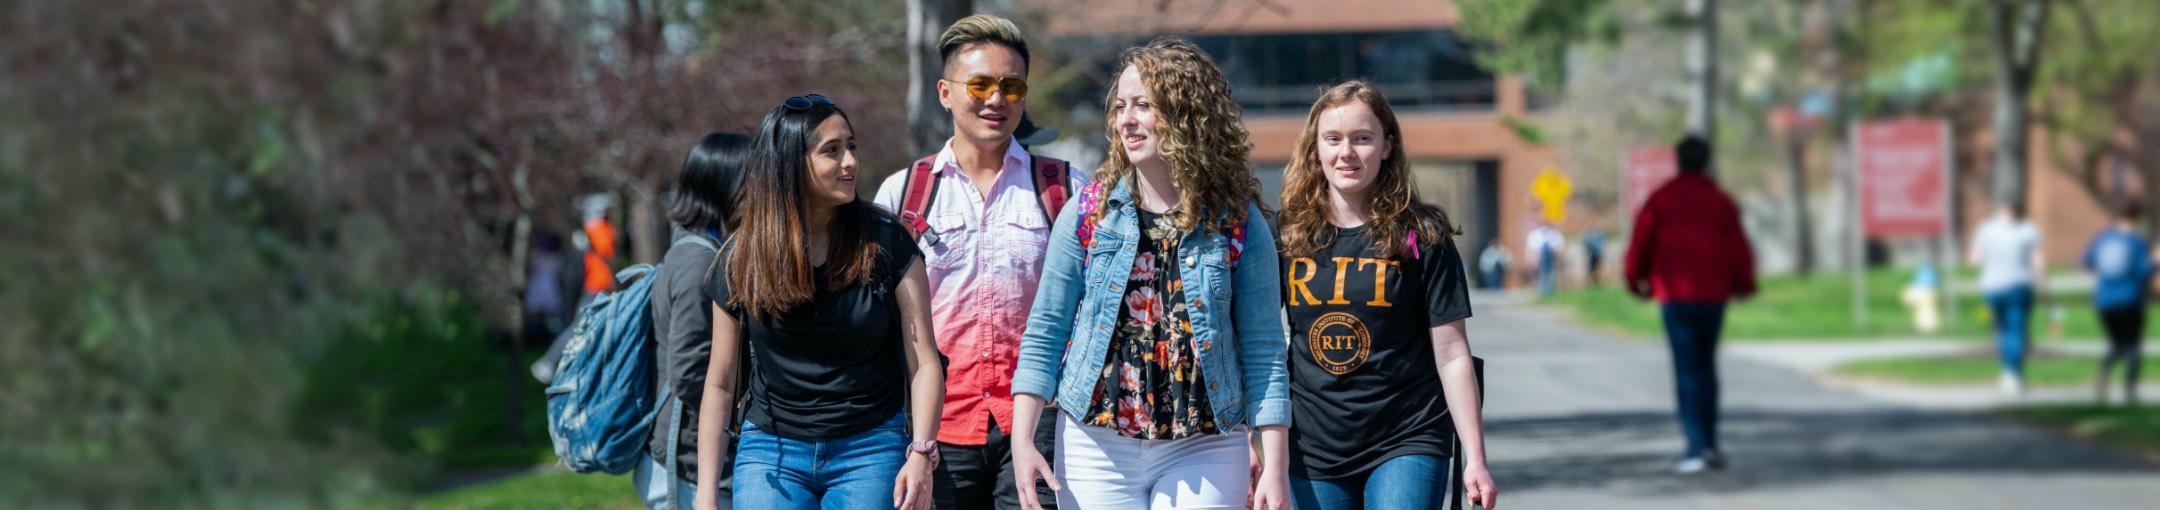 students walking in a group across campus